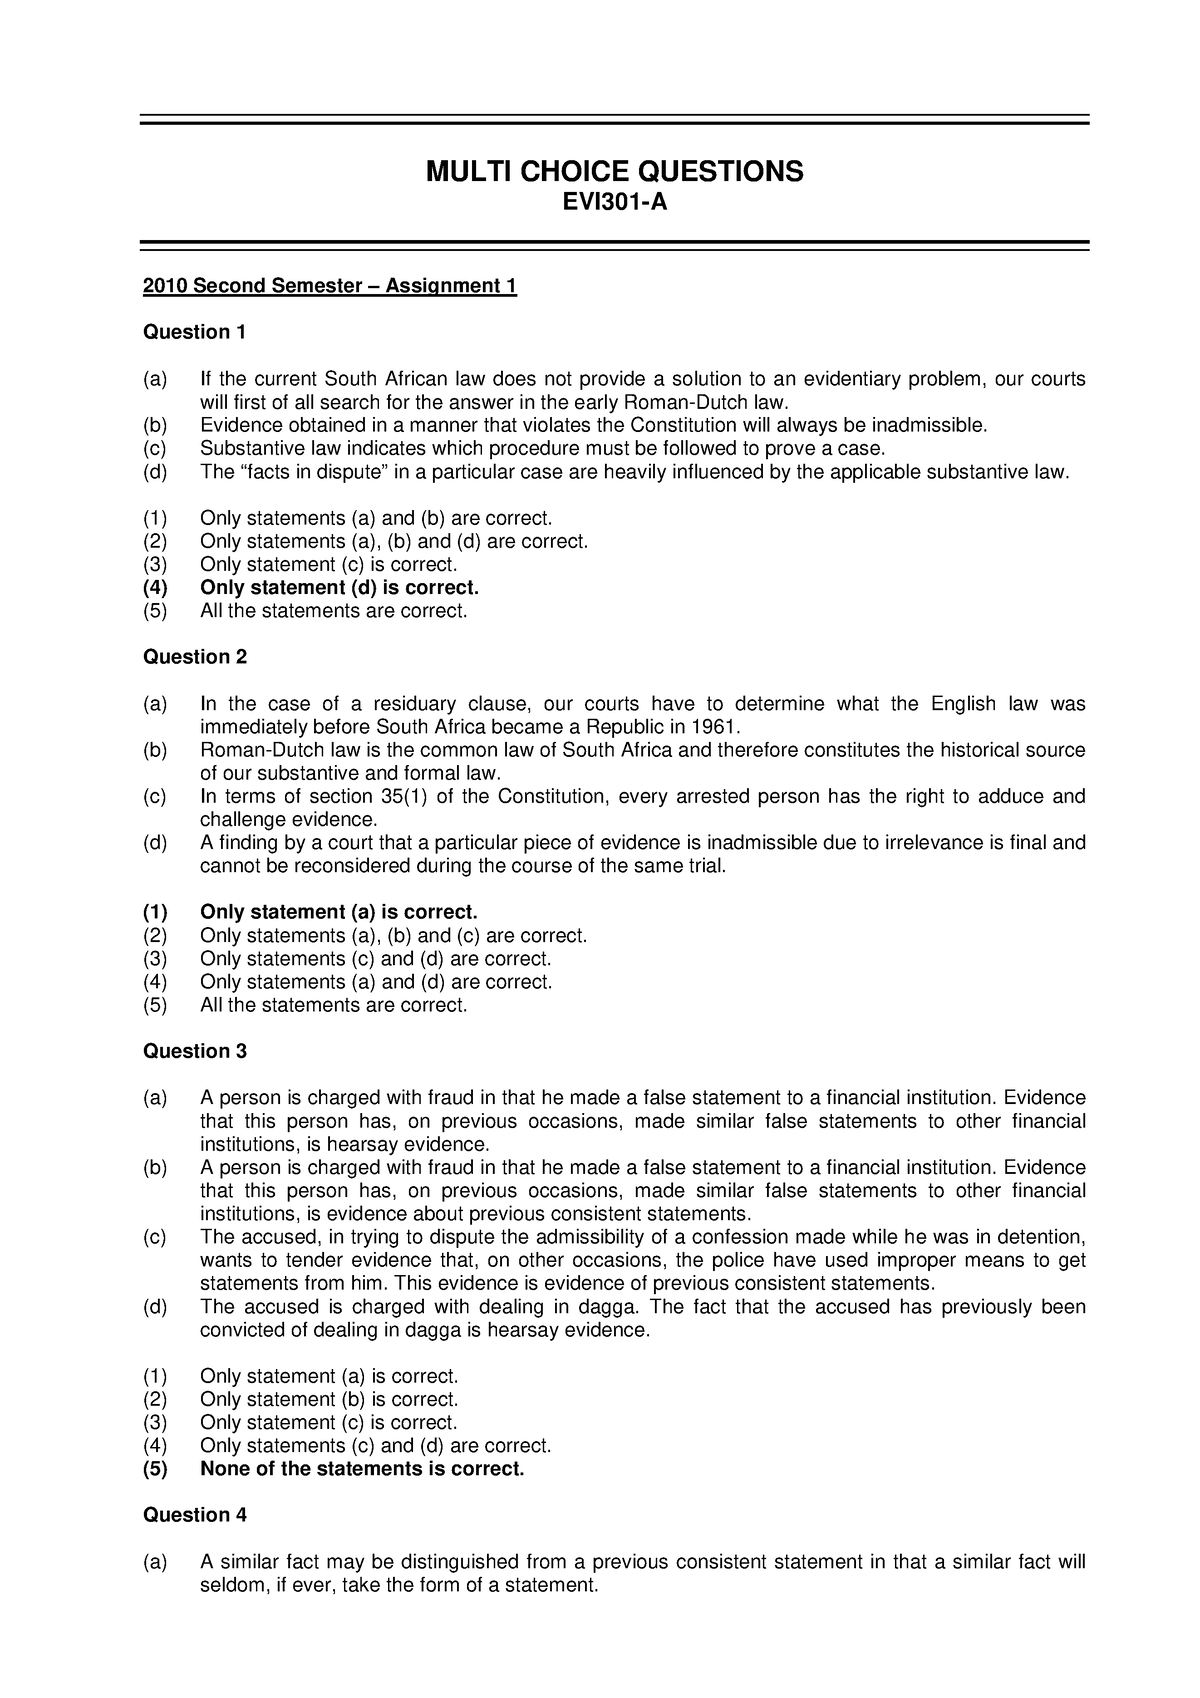 assignment problem mcq with answers